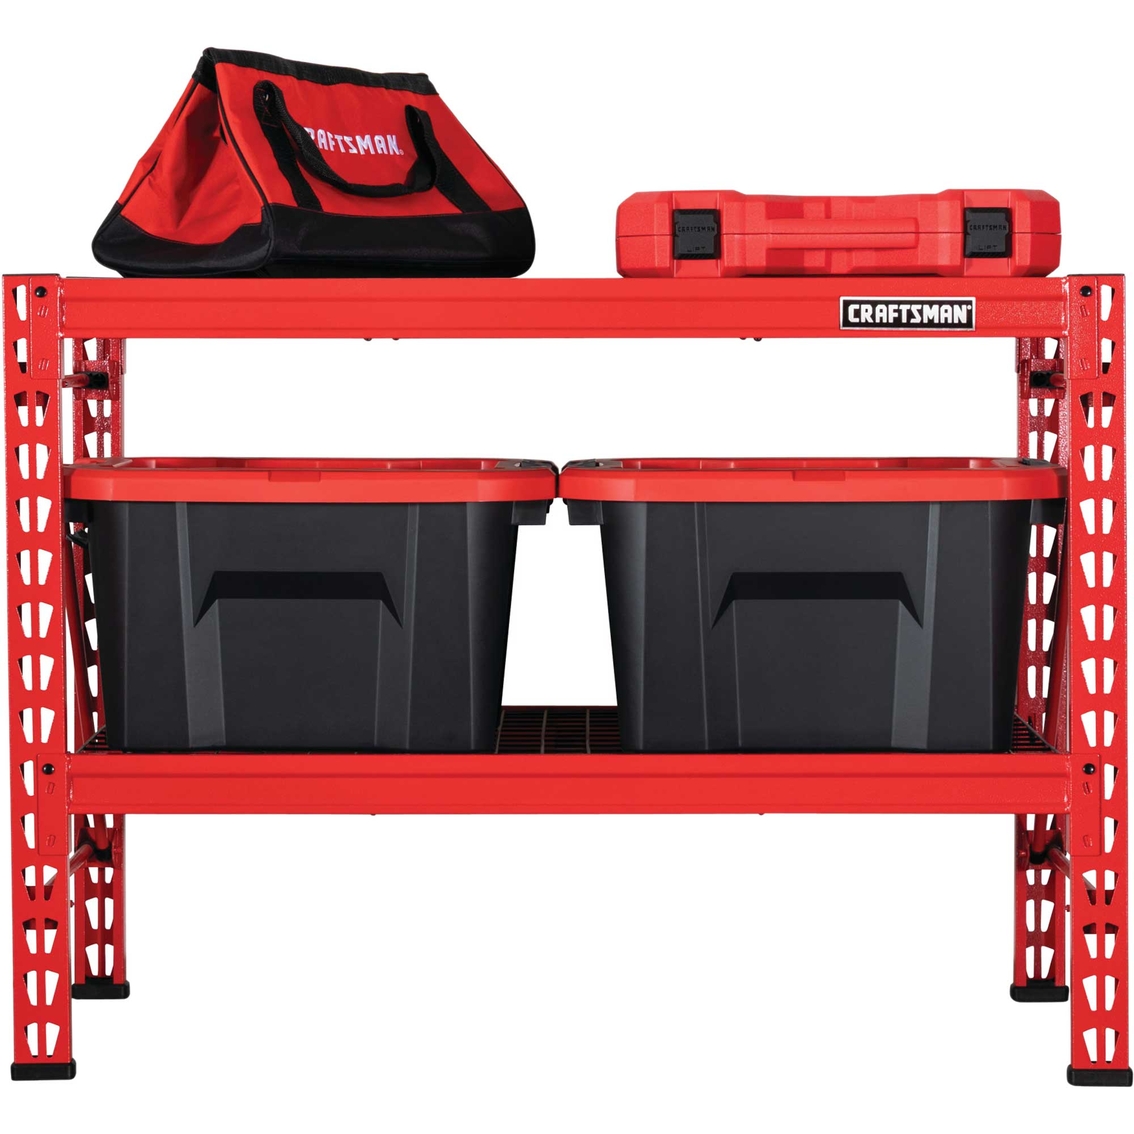 Craftsman 2-Shelf 3 ft. Tall Stackable Tool Chest Depth Storage Rack - Image 10 of 10